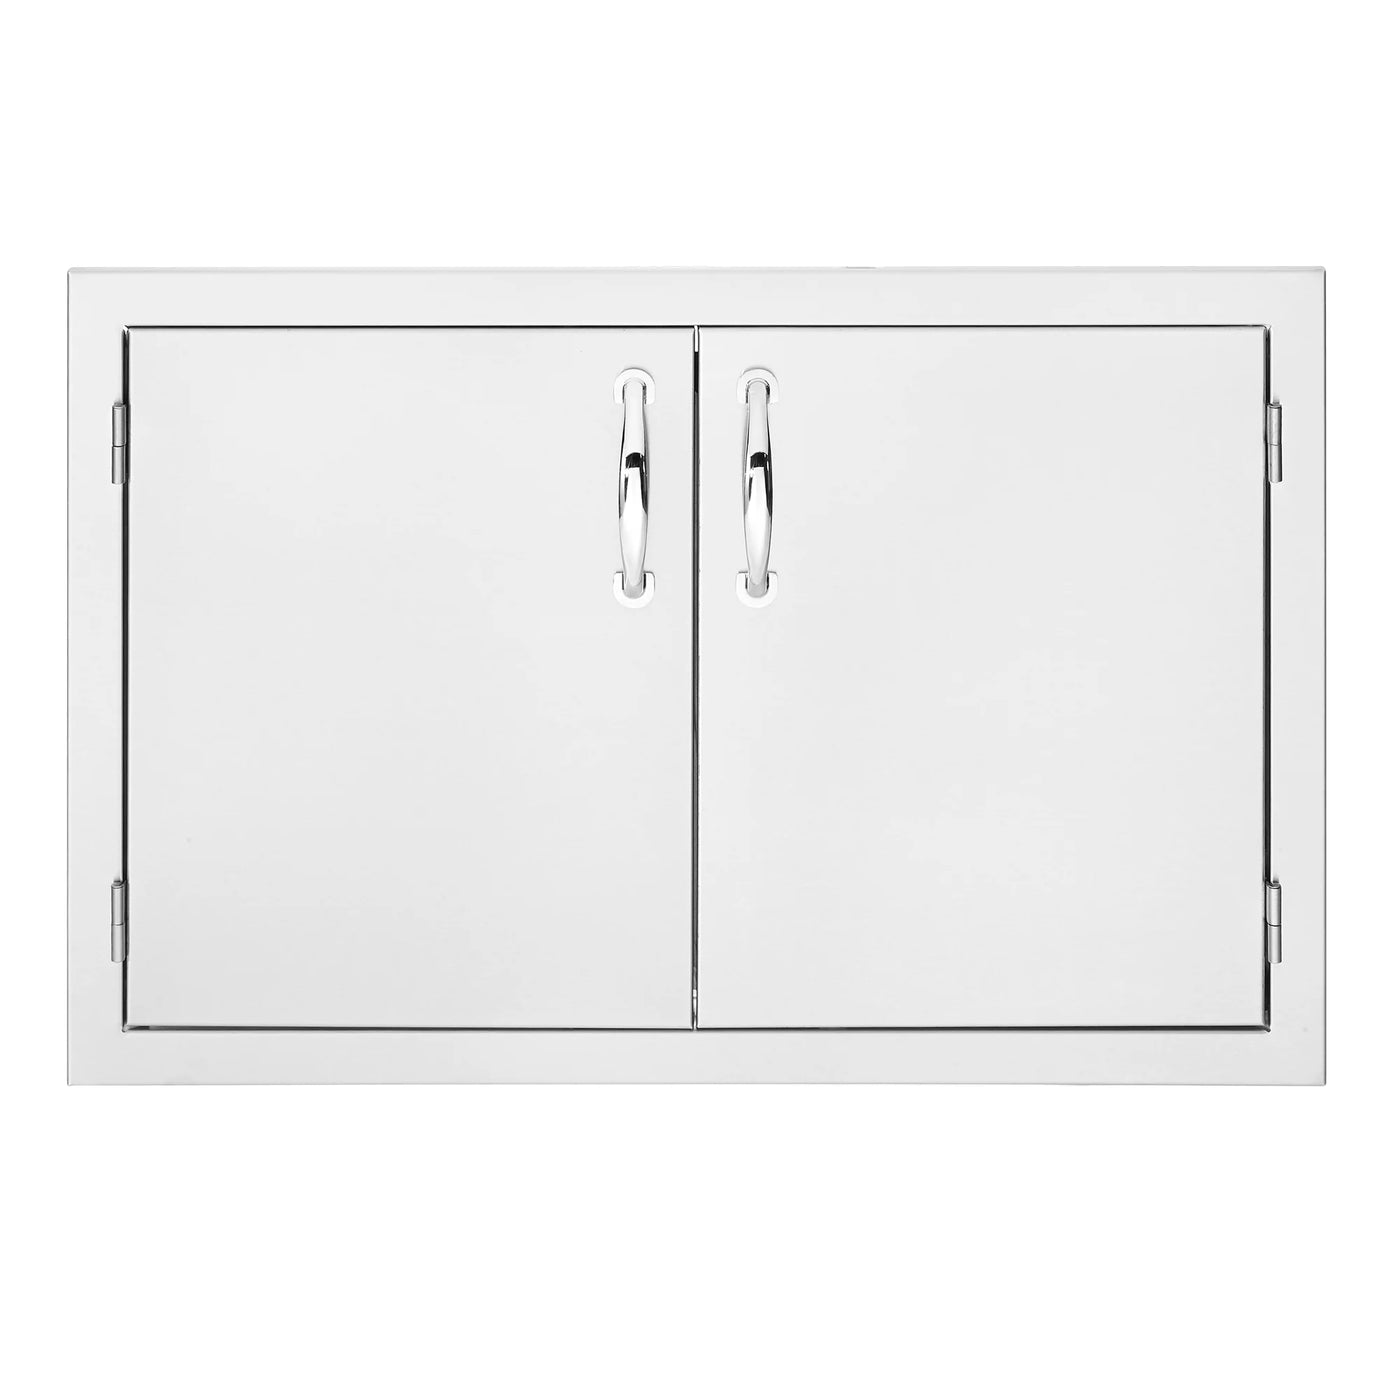 Summerset Sizzler 26" Built-in Grill Double Access Door Refrigerator Trim Surround for SSRFR-24S Sizzler Double Side Burner 5x14" Island Vent Panel